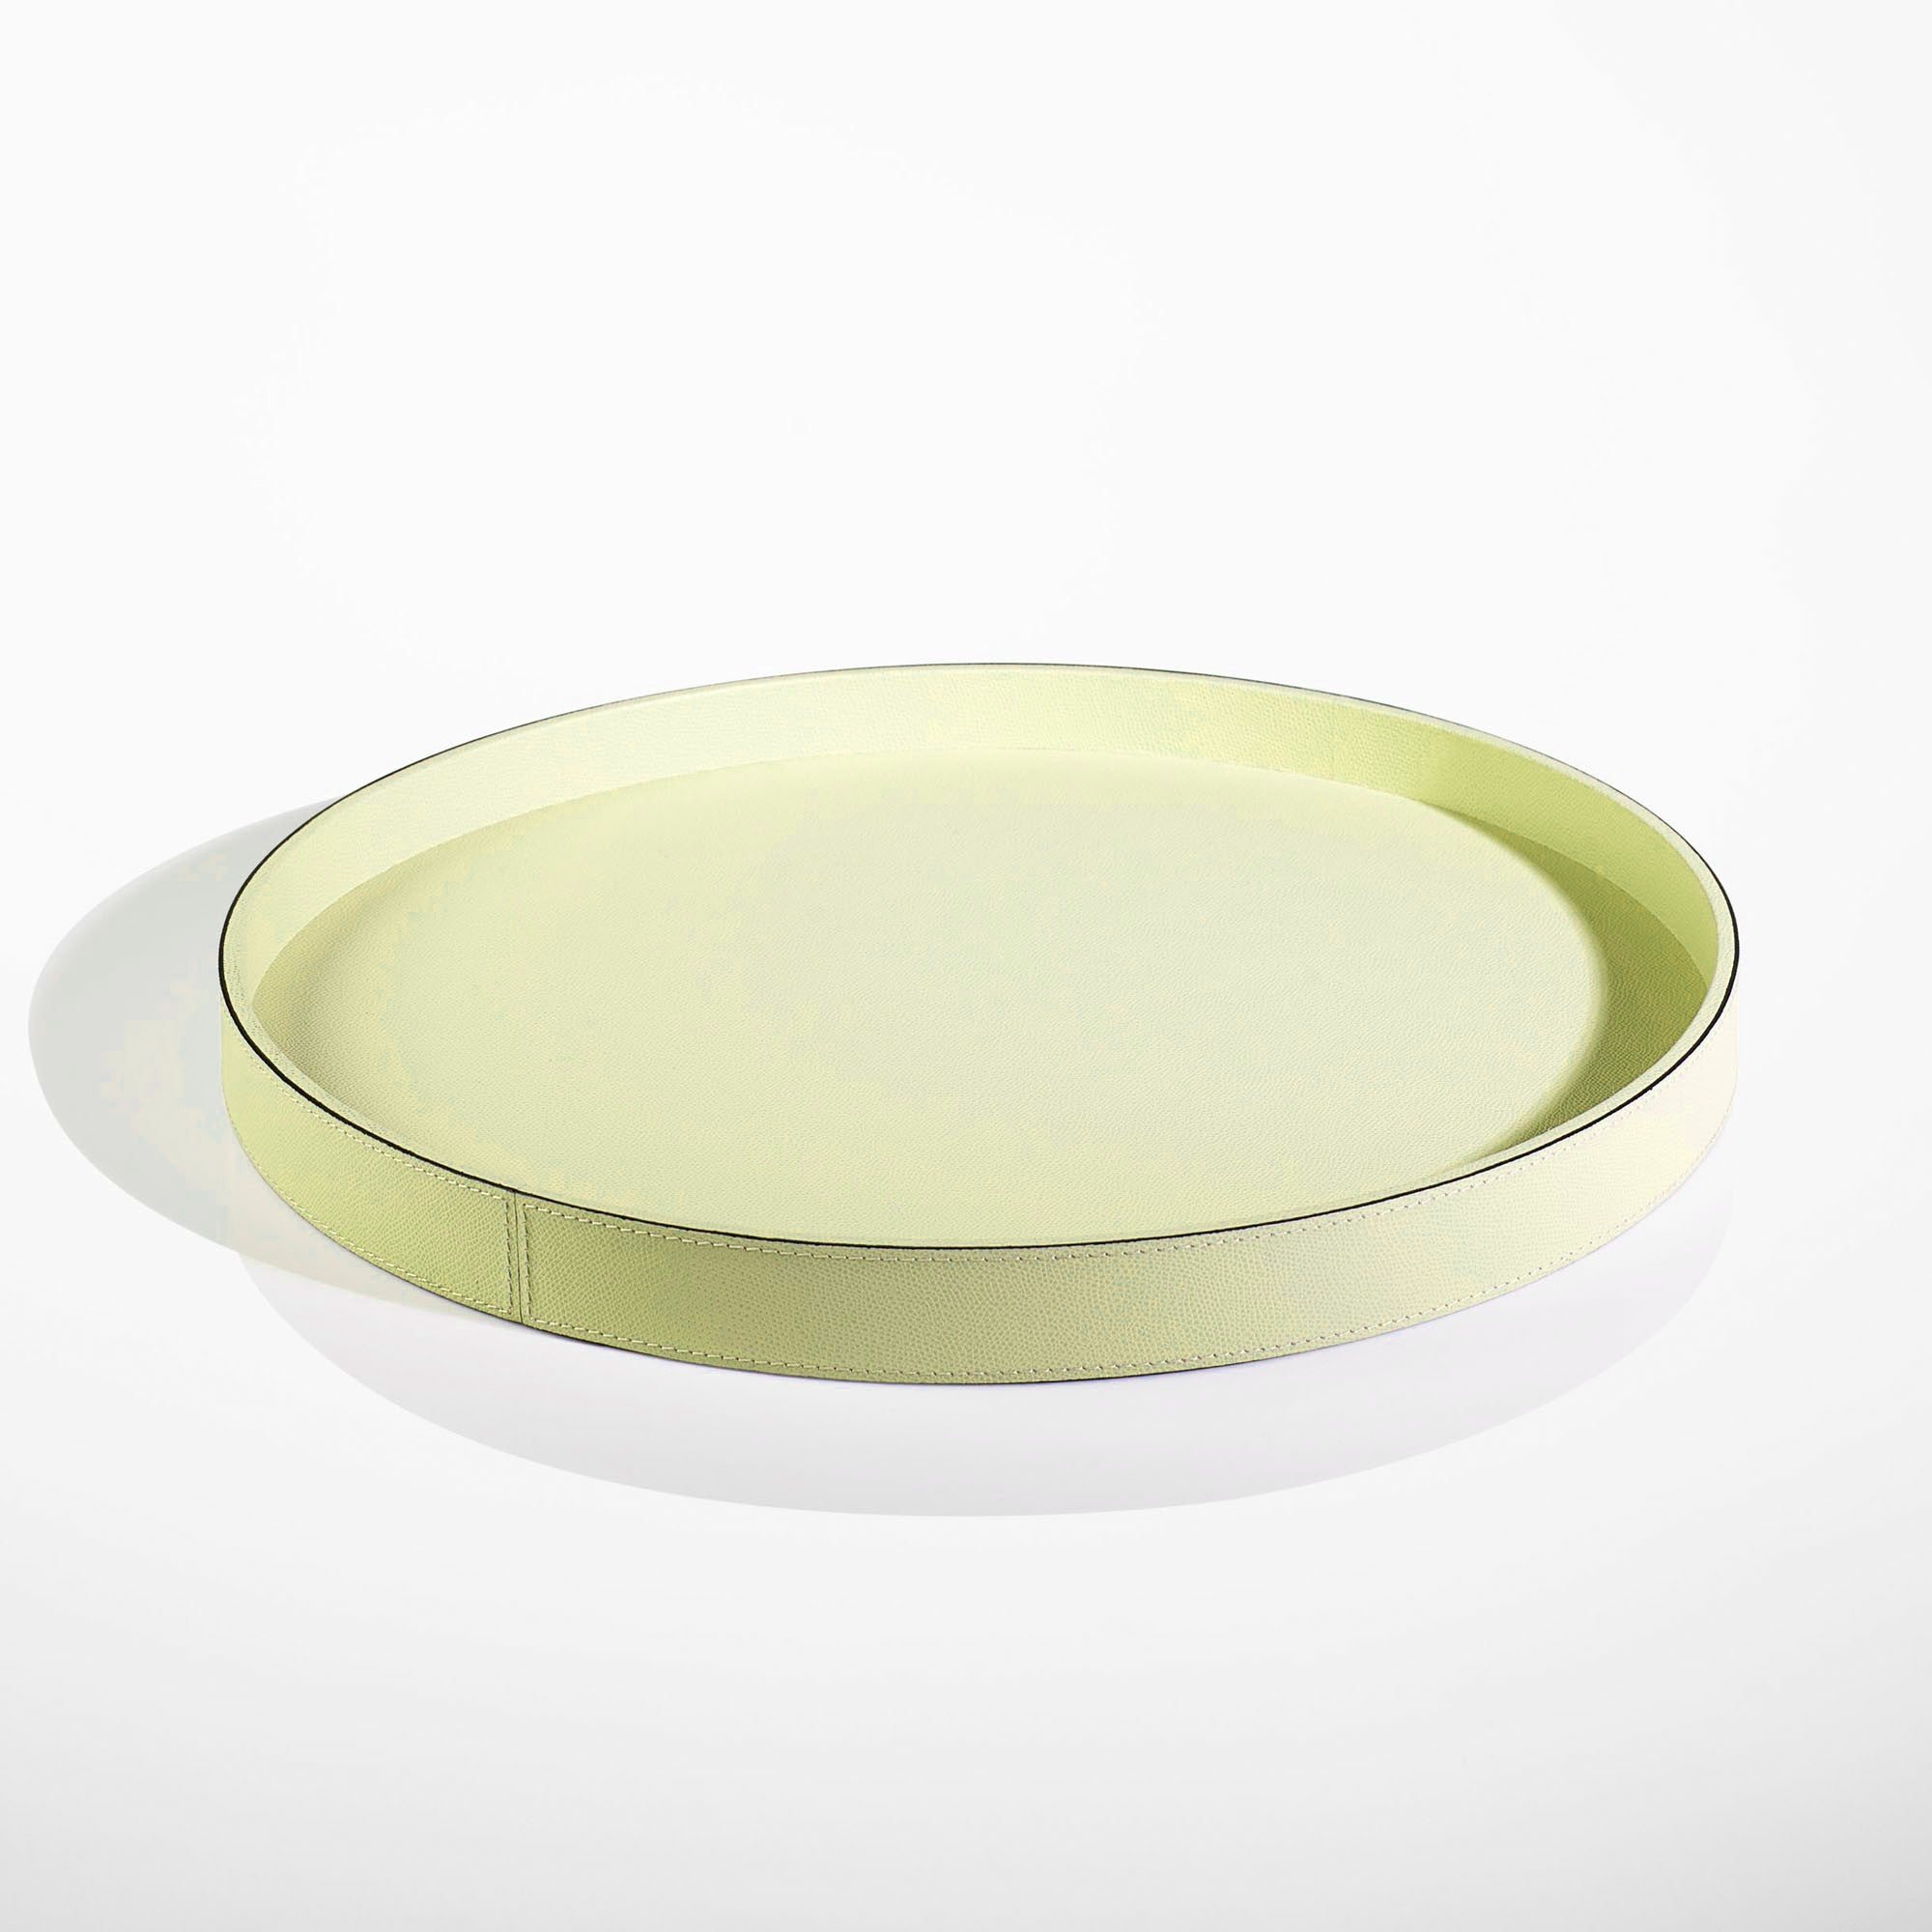 Ebury Round Tray, Luxury Home Accessories & Gifts